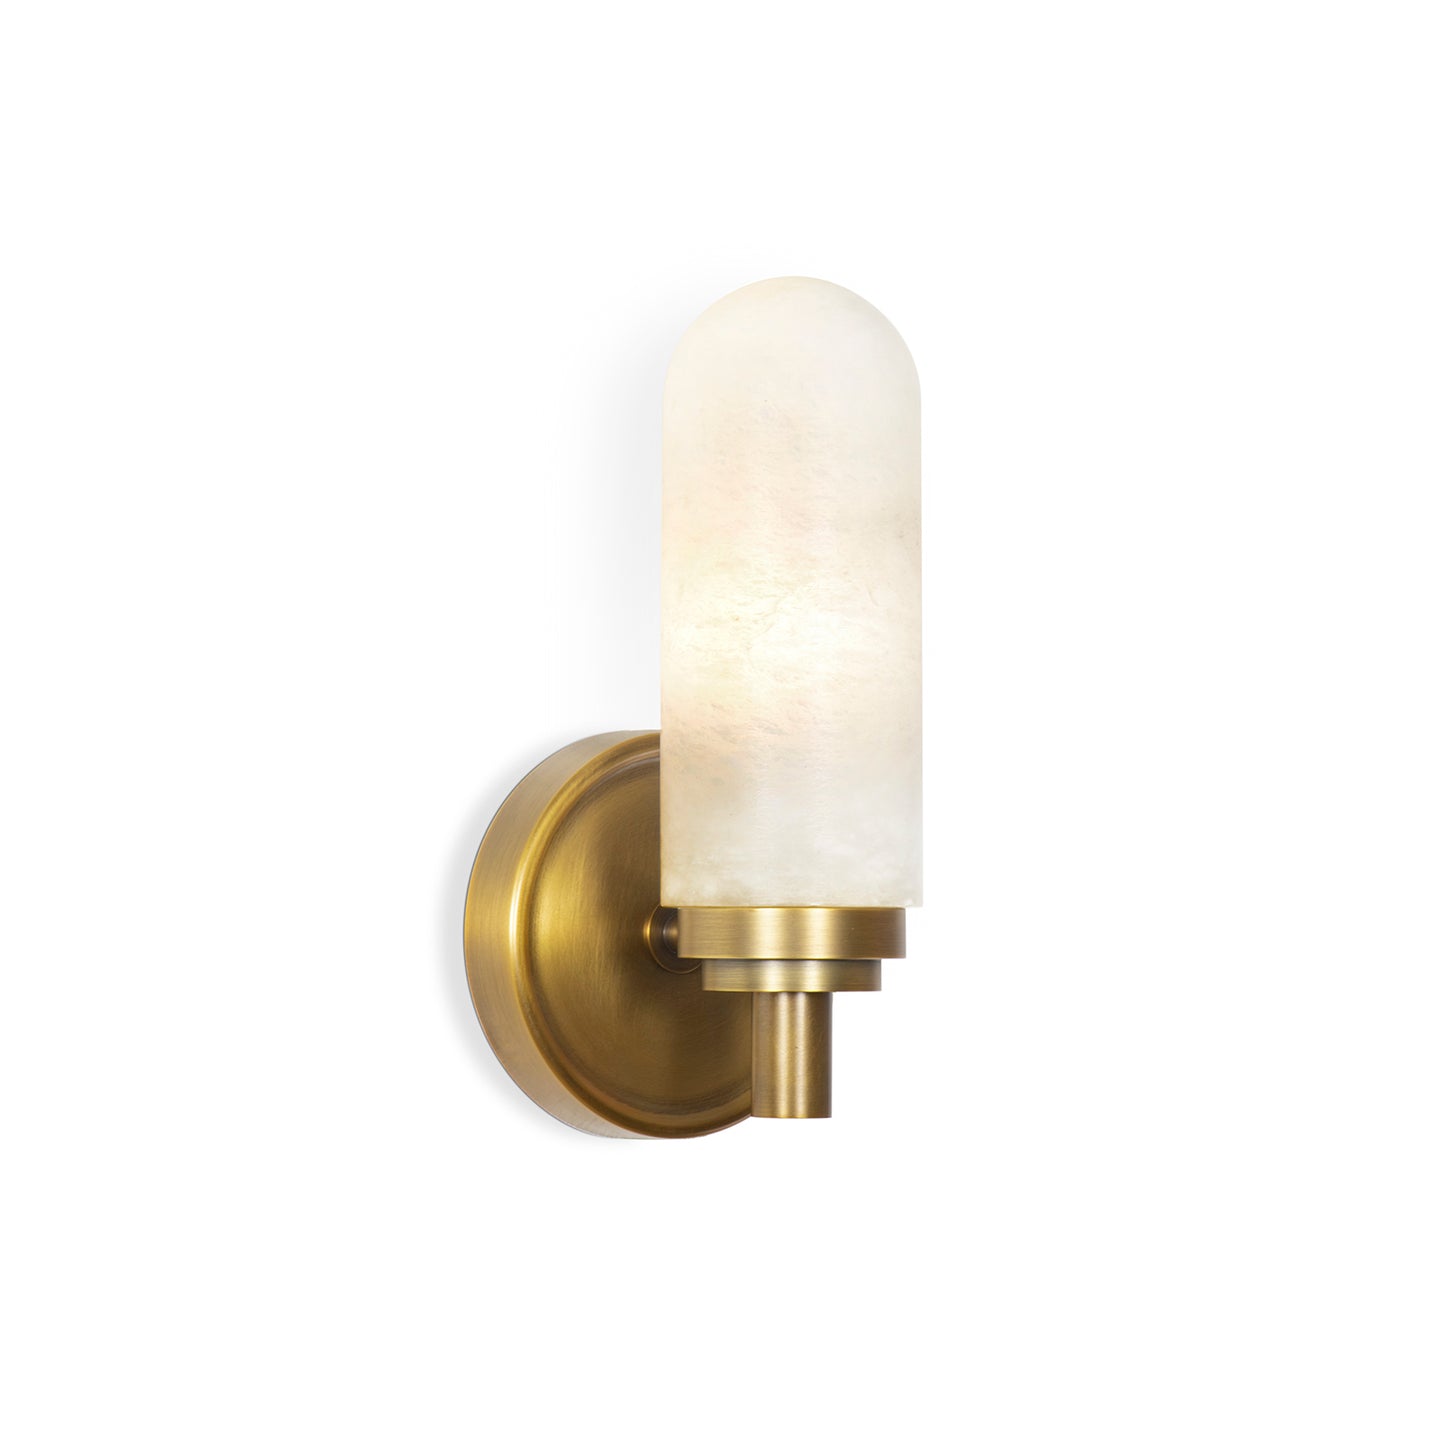 Salon Sconce Single in Natural Brass by Regina Andrew